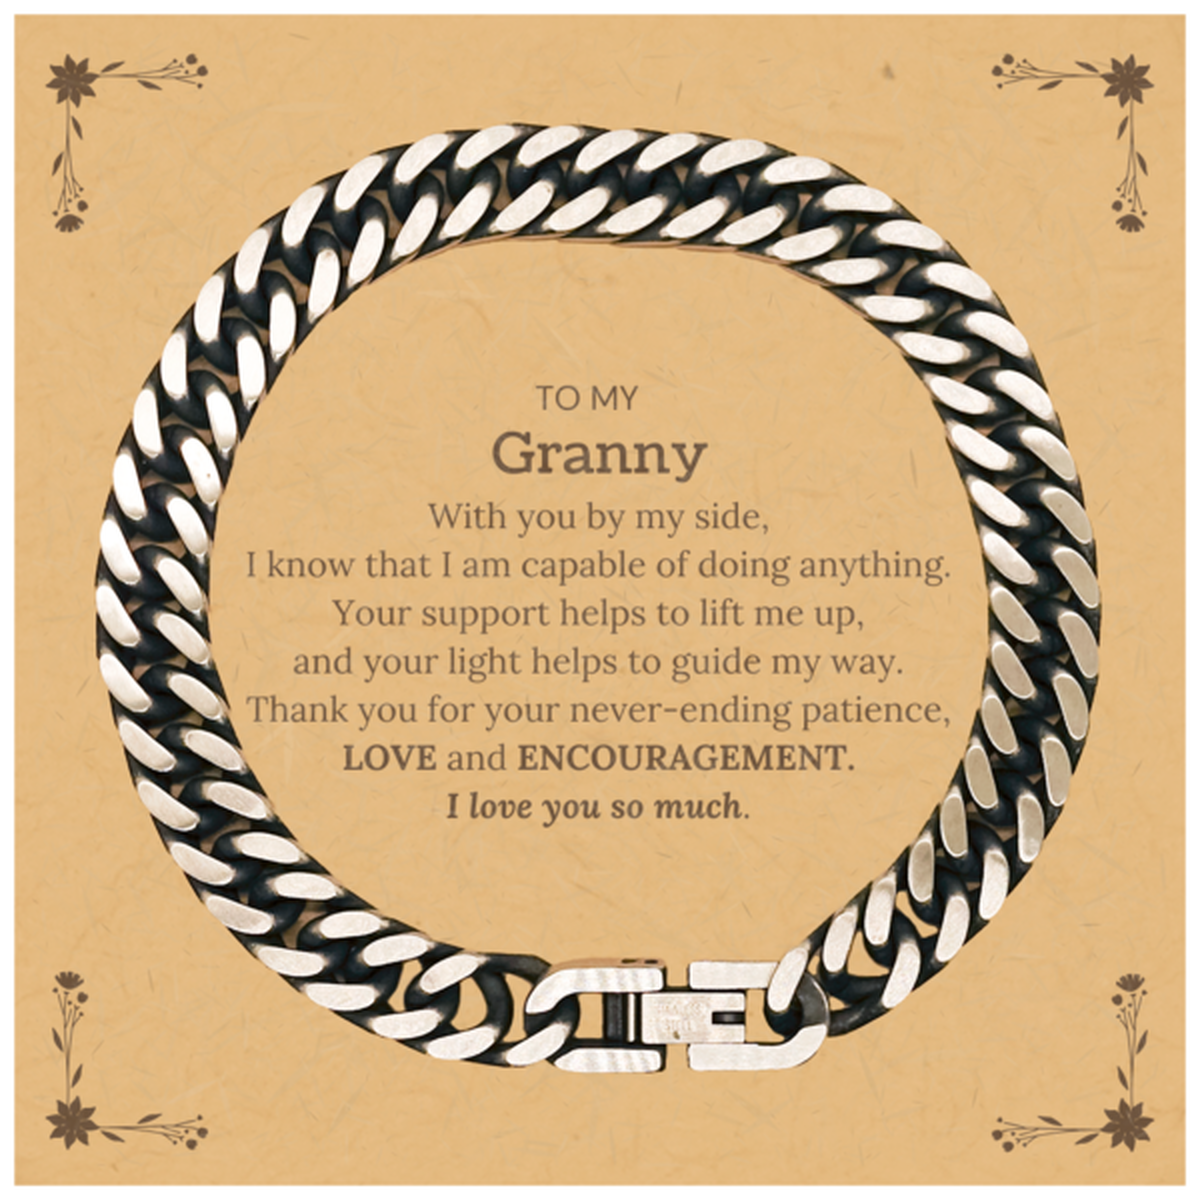 Appreciation Granny Cuban Link Chain Bracelet Gifts, To My Granny Birthday Christmas Wedding Keepsake Gifts for Granny With you by my side, I know that I am capable of doing anything. I love you so much